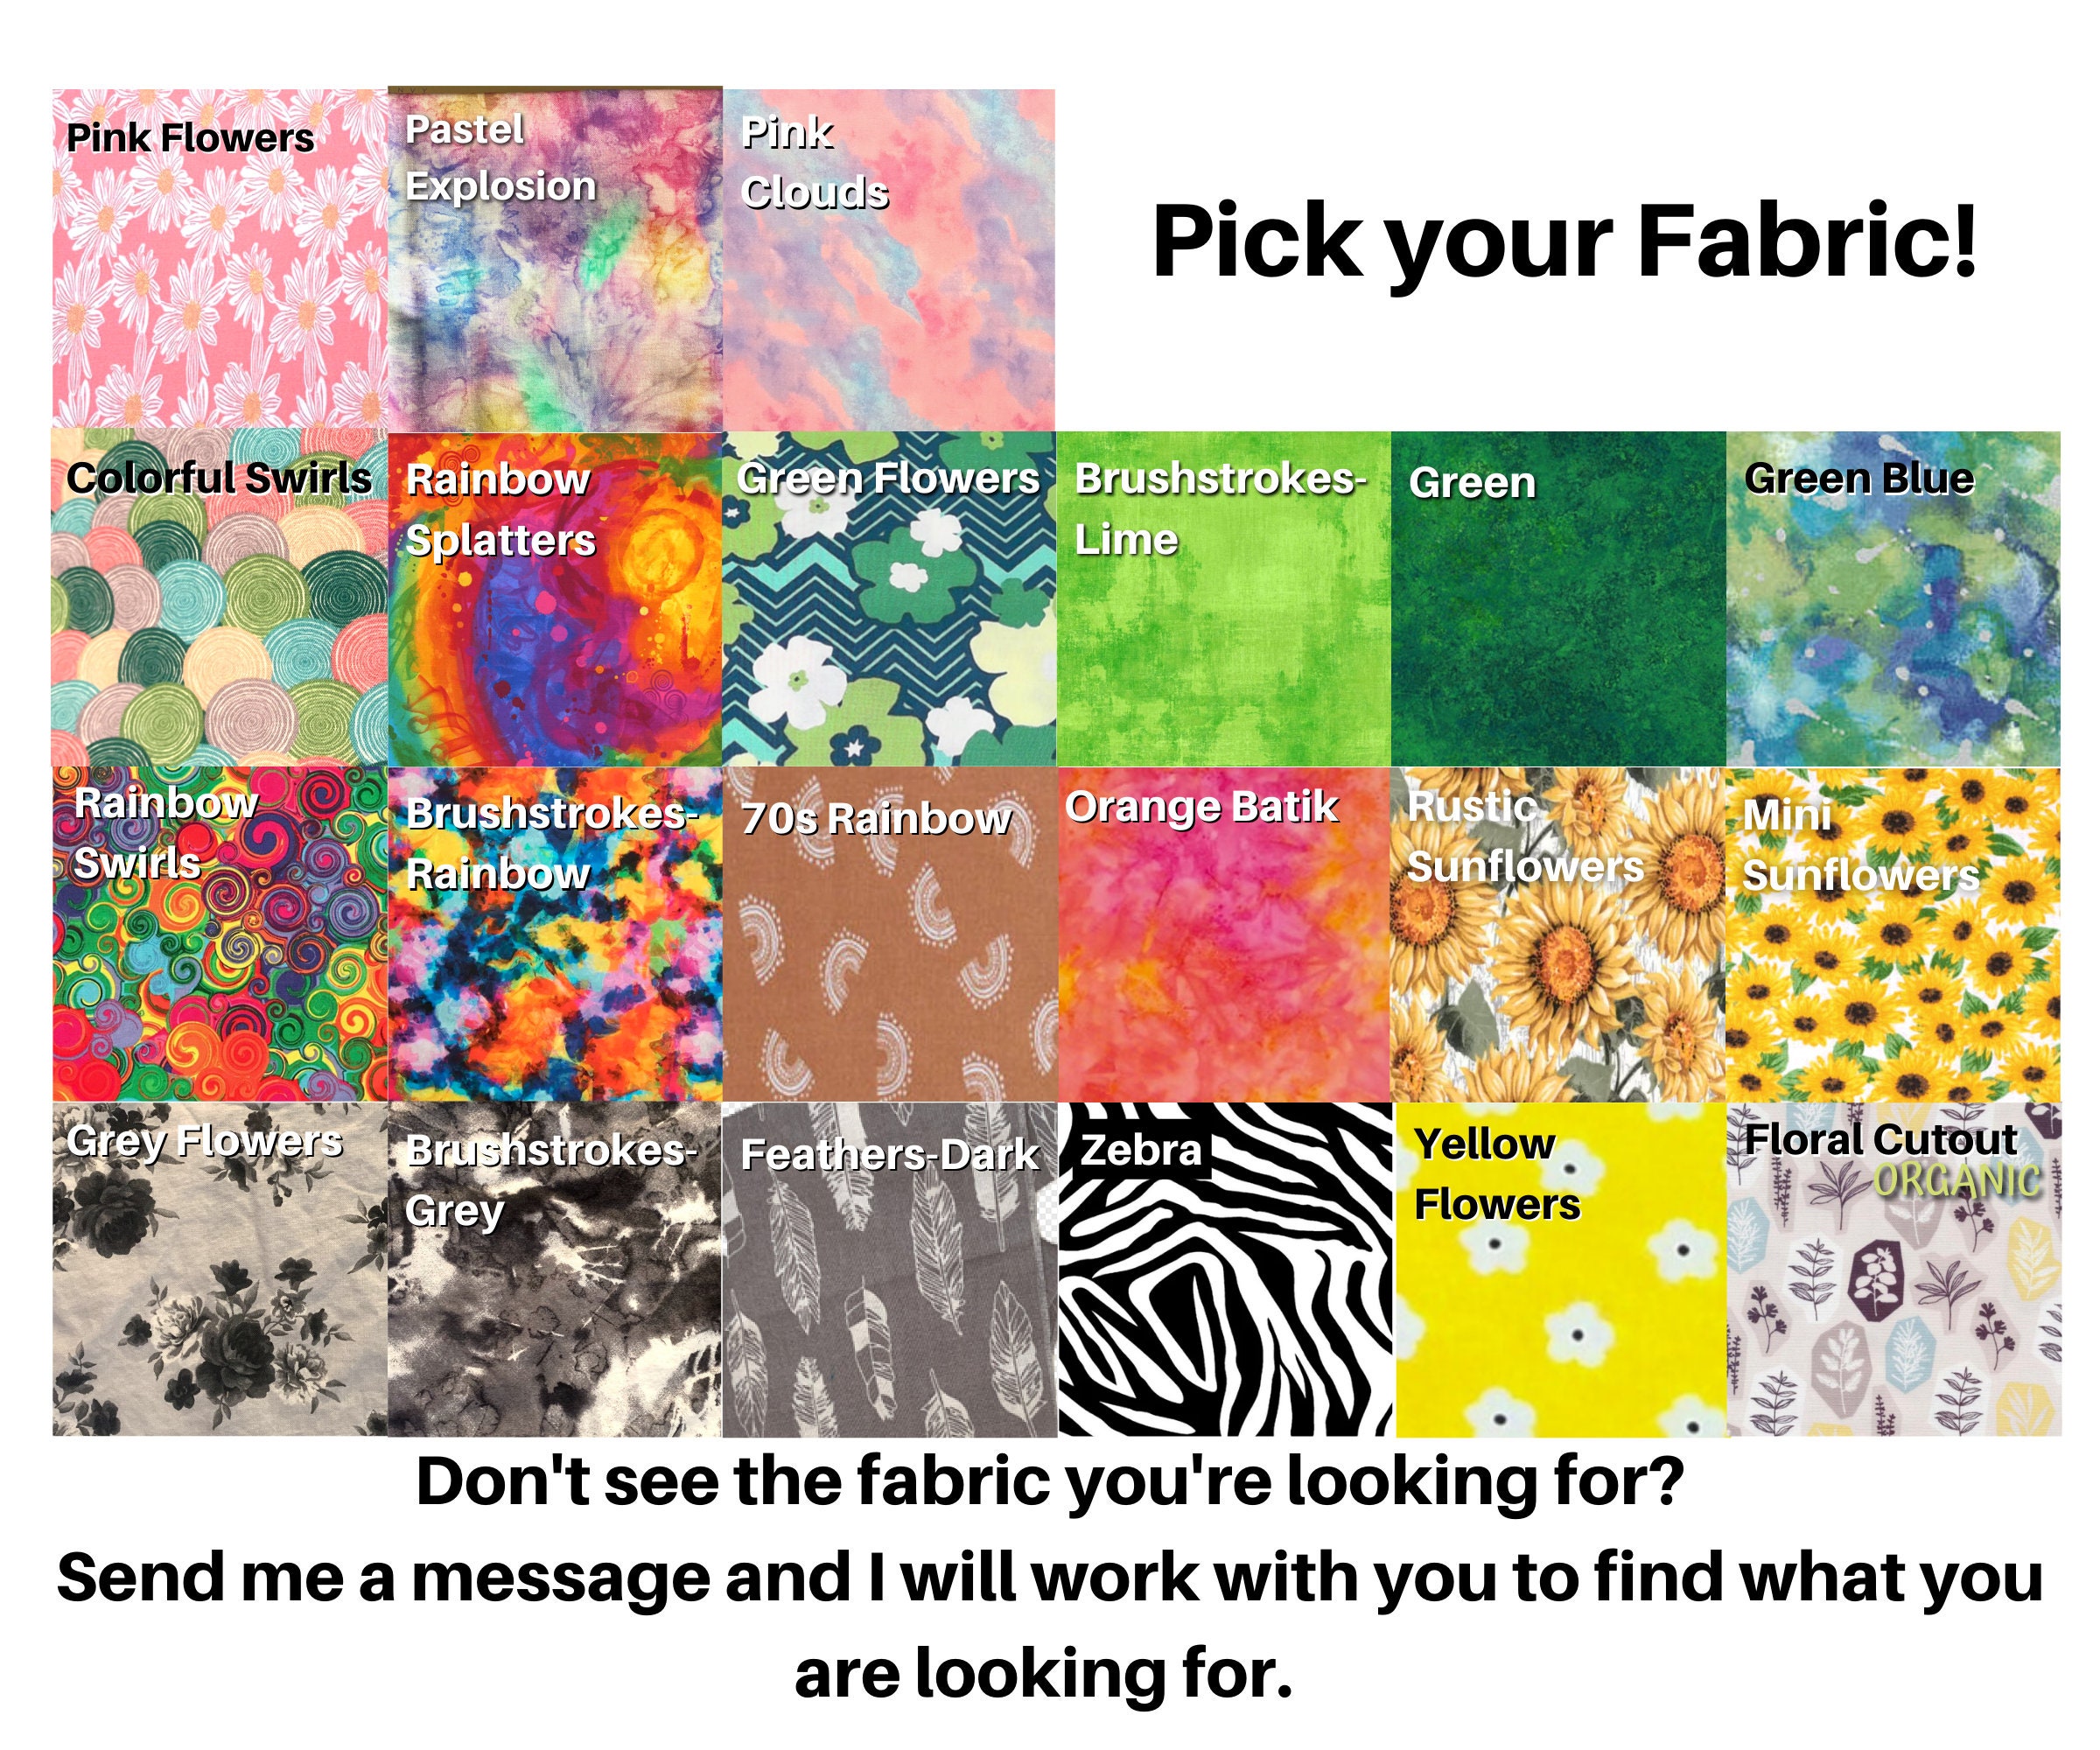 24 fabrics are shown in colors Pink, red, rainbow, green, orange, yellow, and greys. A note at the bottom says: Don't see the fabric you're looking for? Send me a message and I will work with you to find what you are looking for?